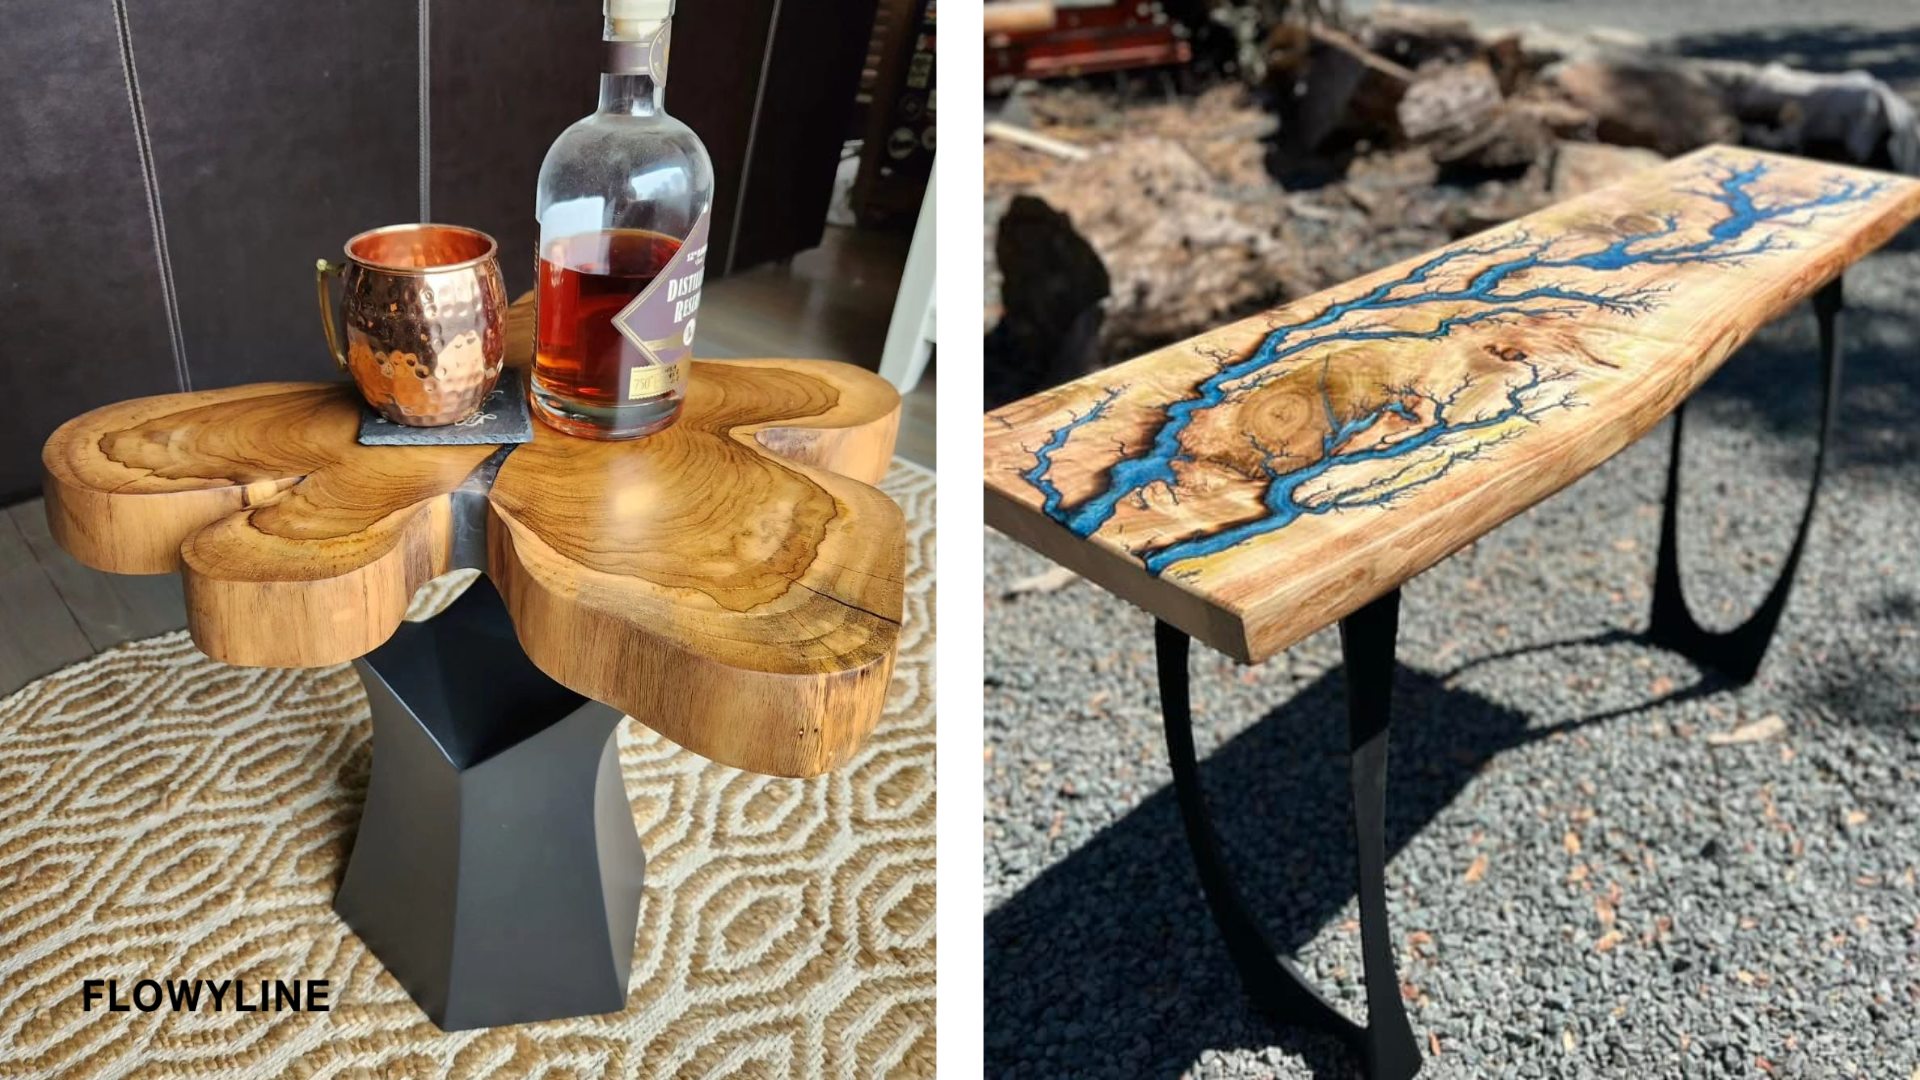 Finding new ideas for your stunning live-edge tables